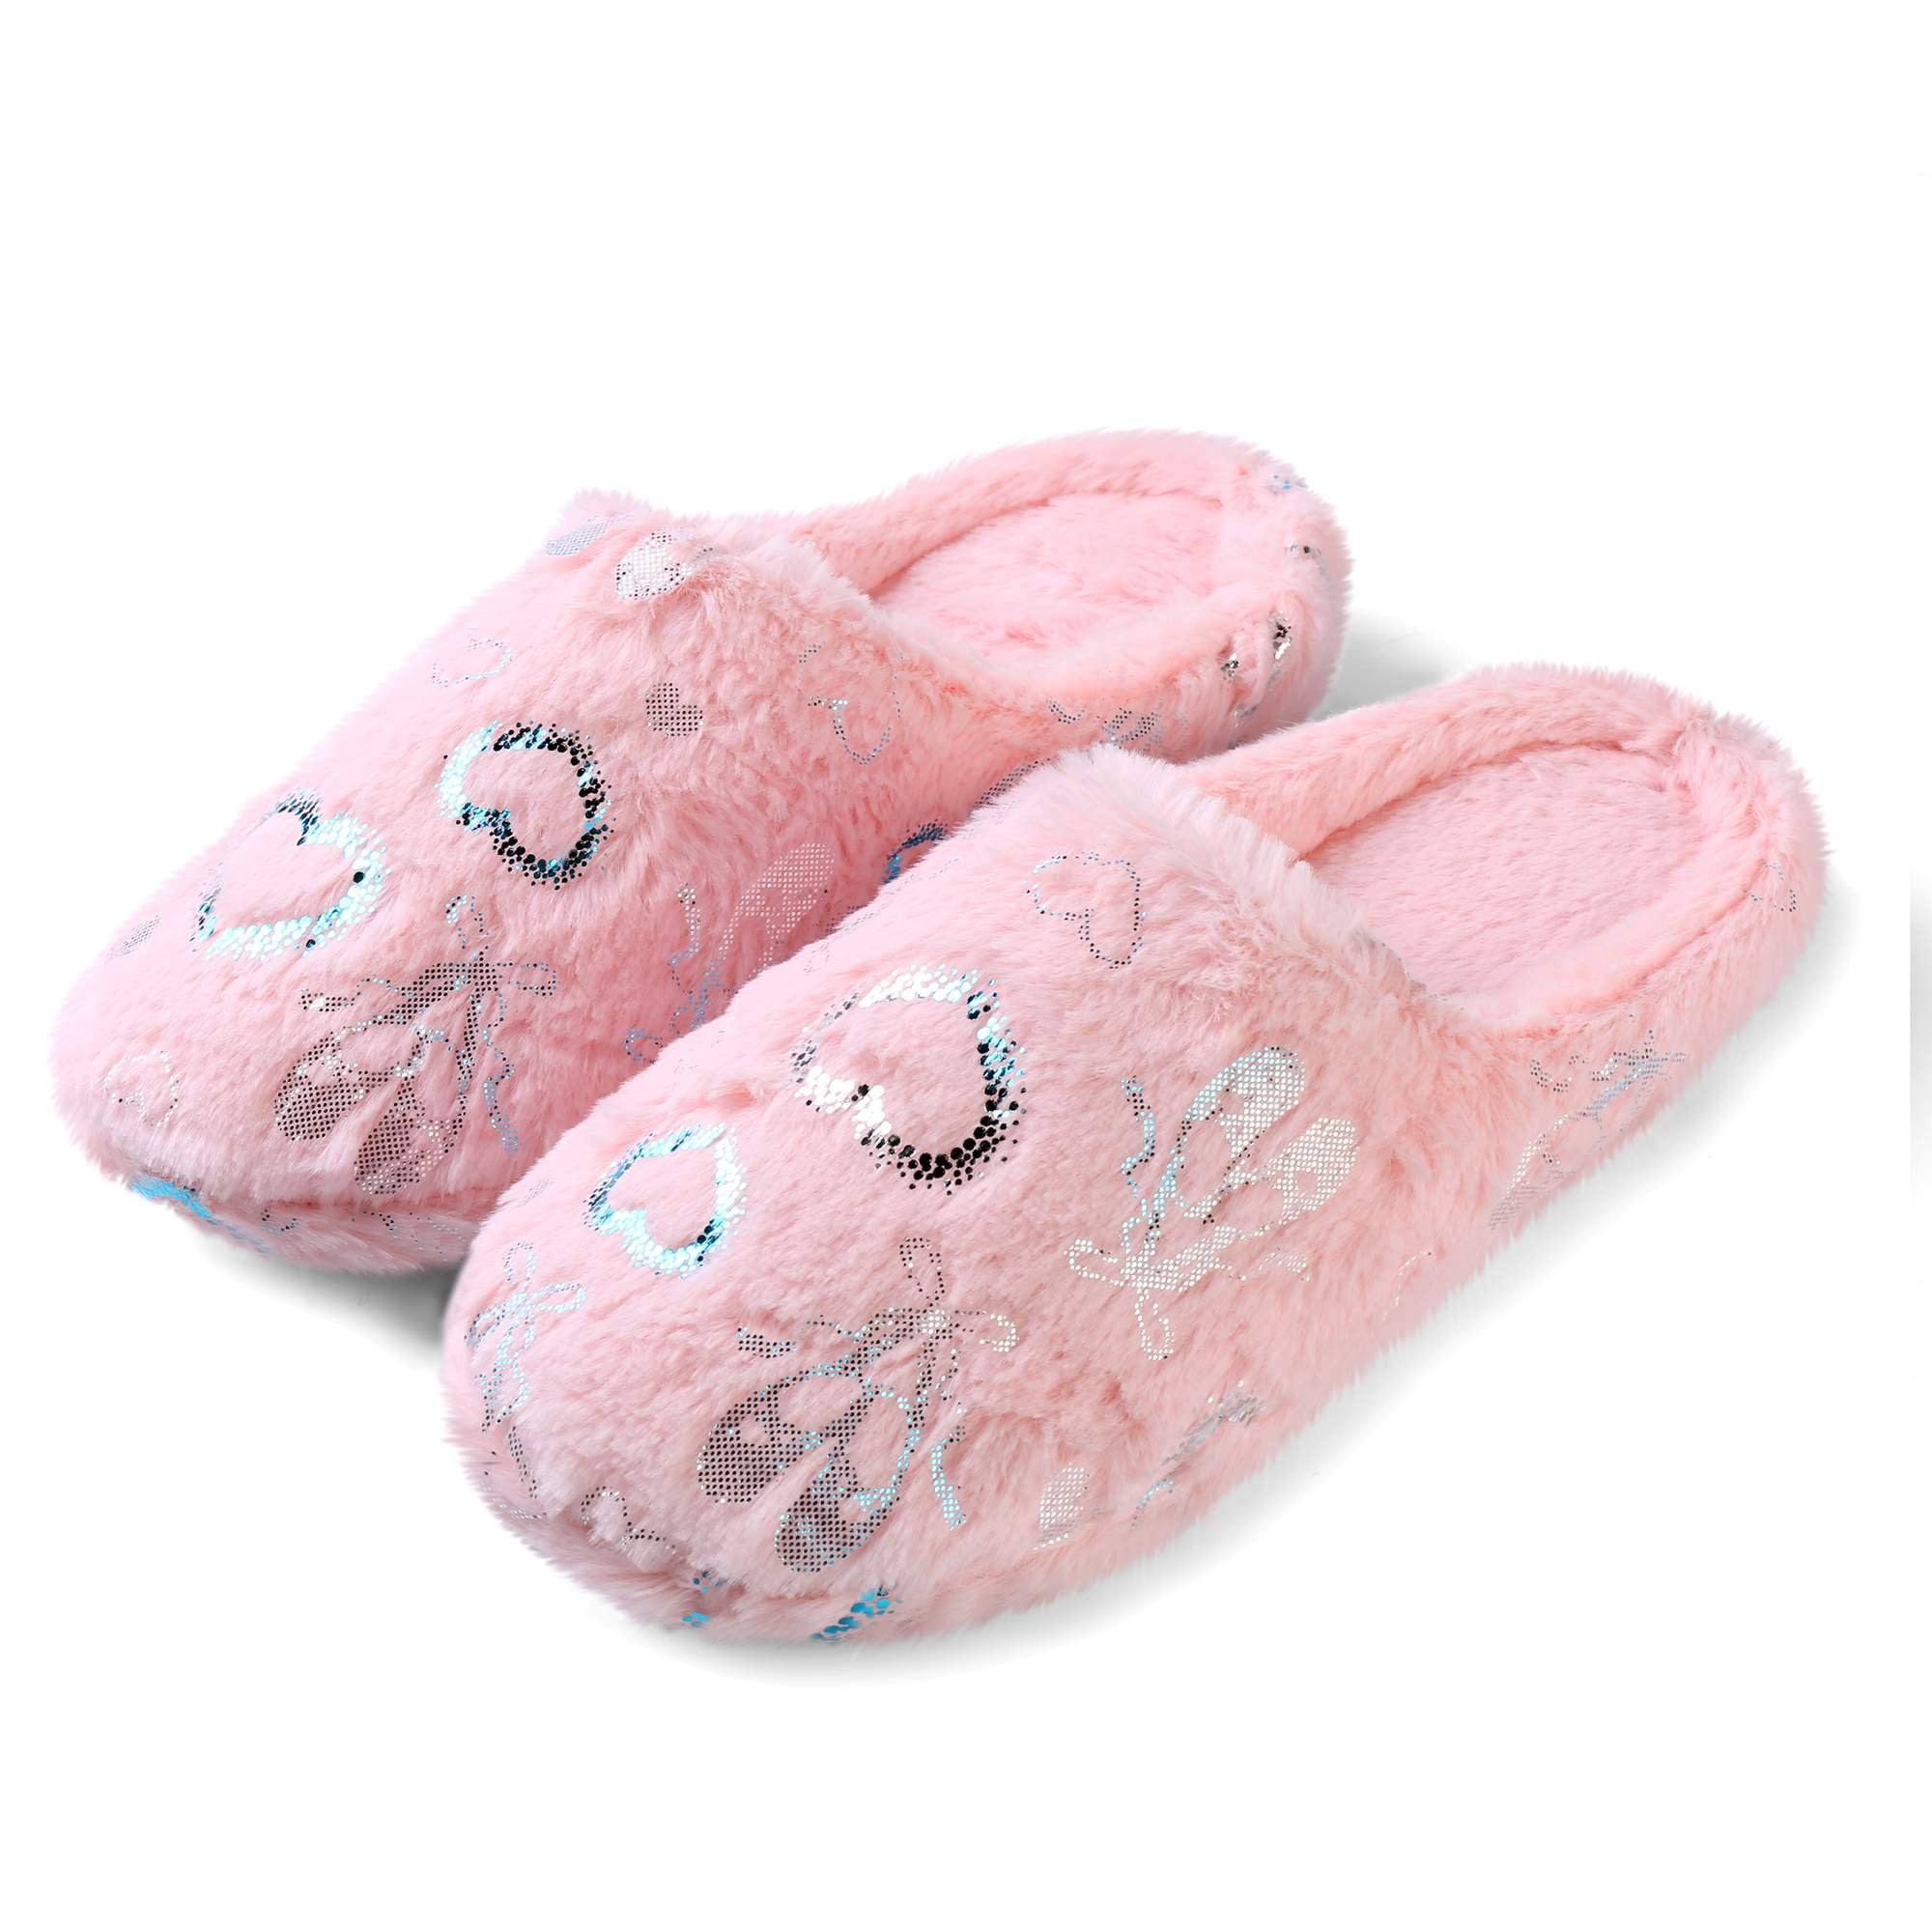 Bear Design Fuzzy Novelty Slippers, Pink Preppy Style College Cartoon Fun  Slippers